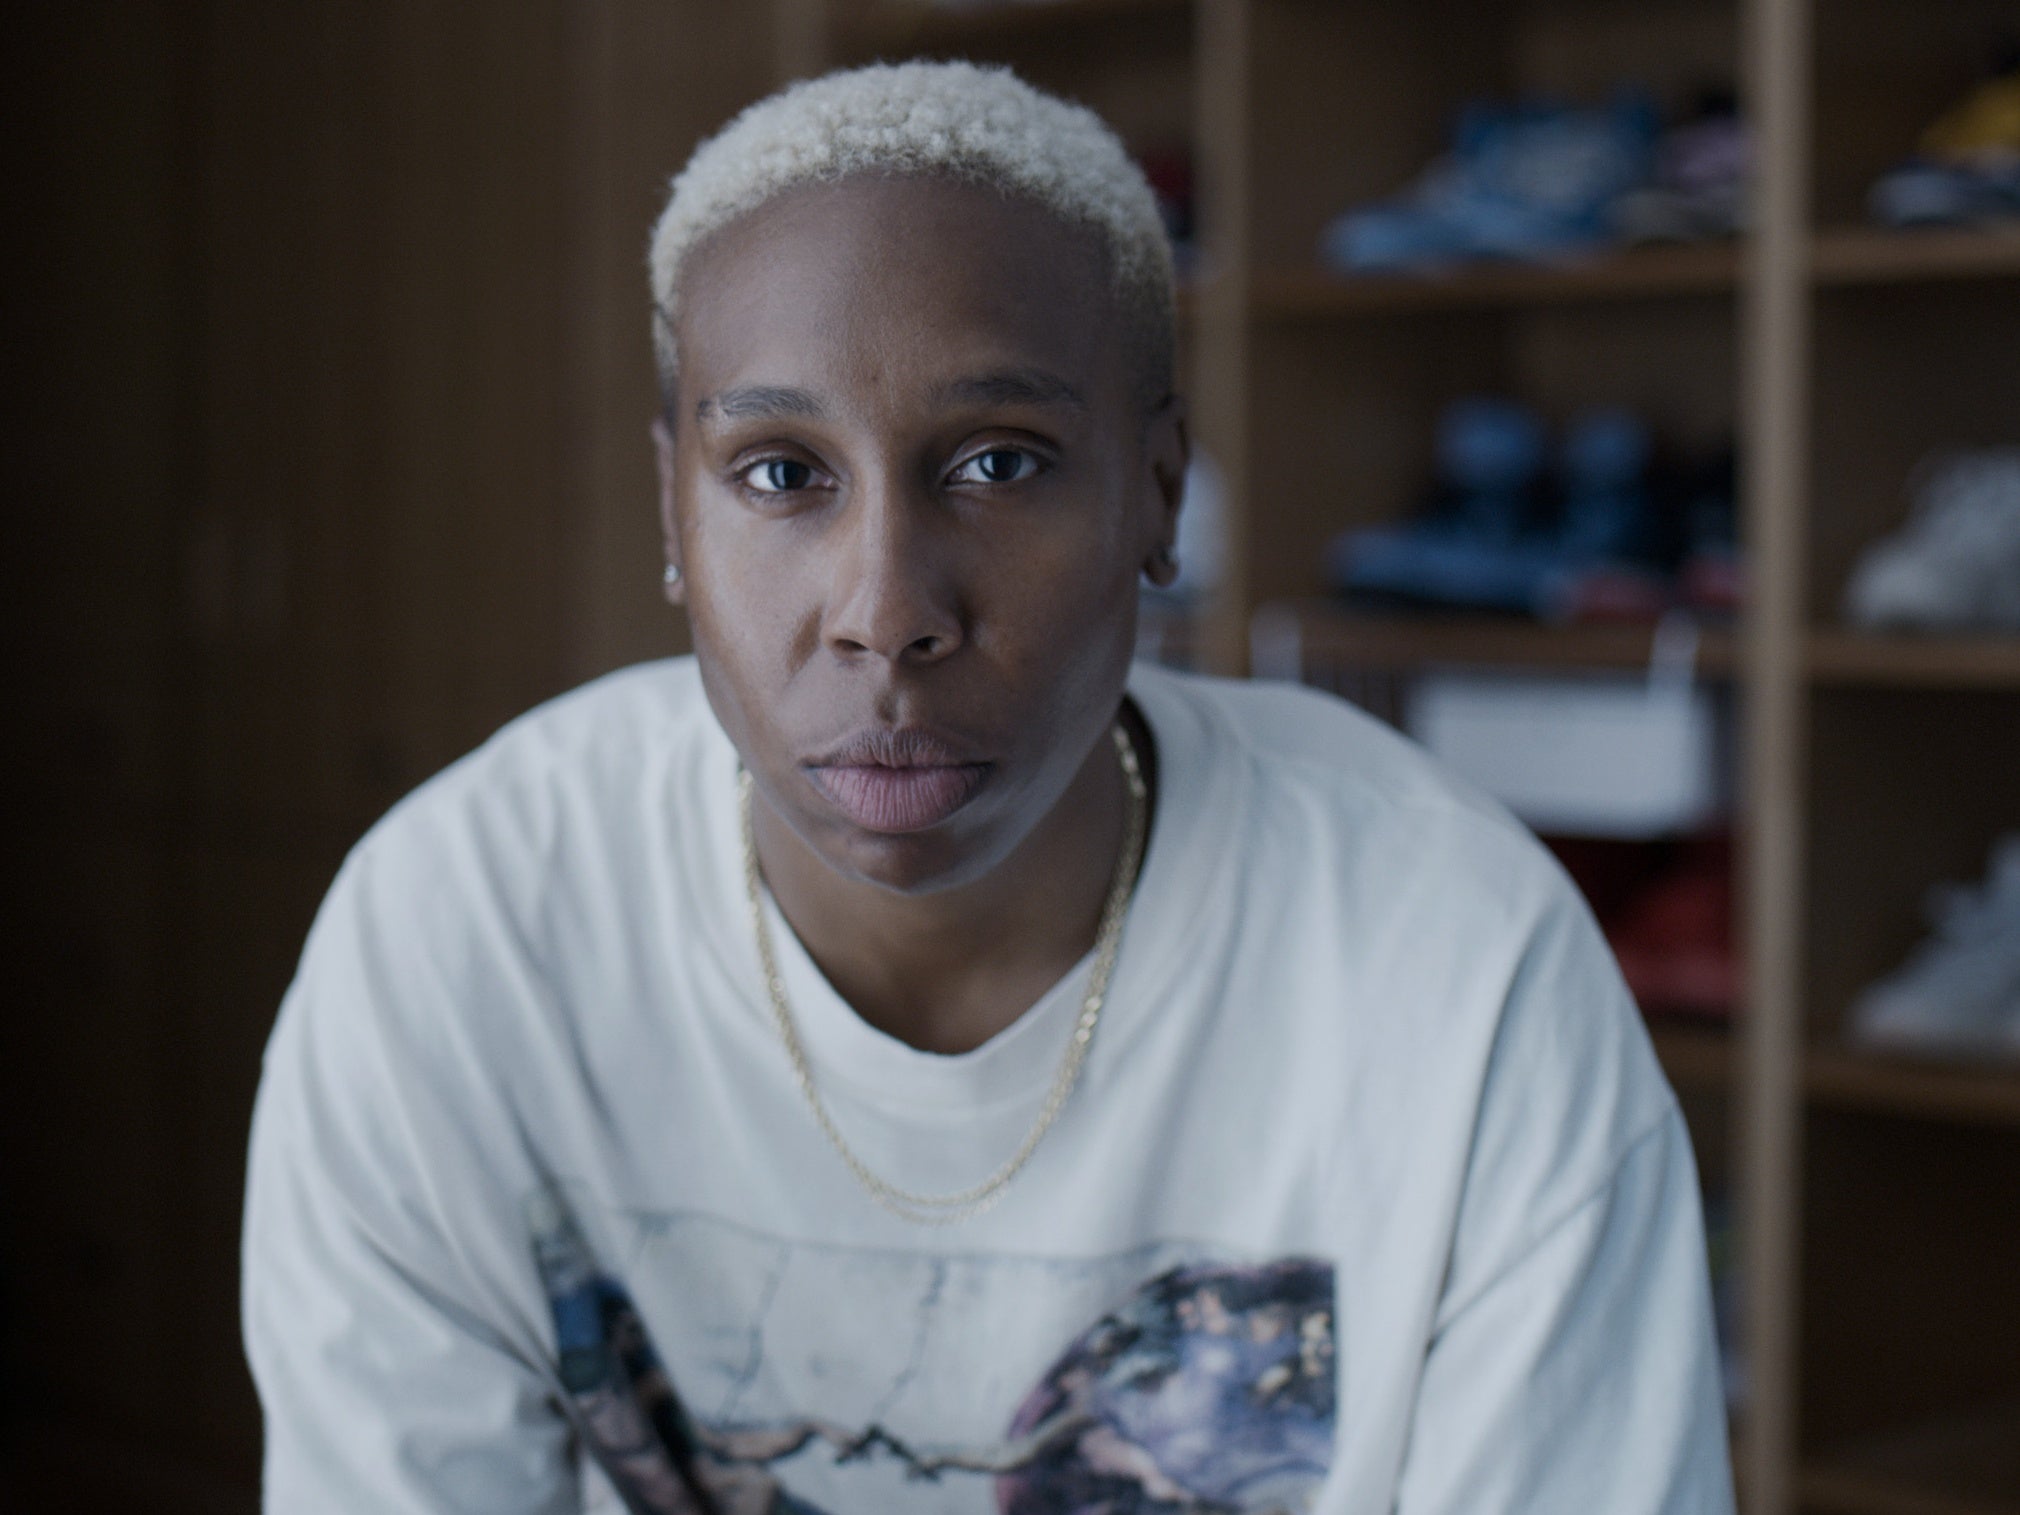 Sneakerhead Lena Waithe Sits Down To Talk About Kicks In New Series